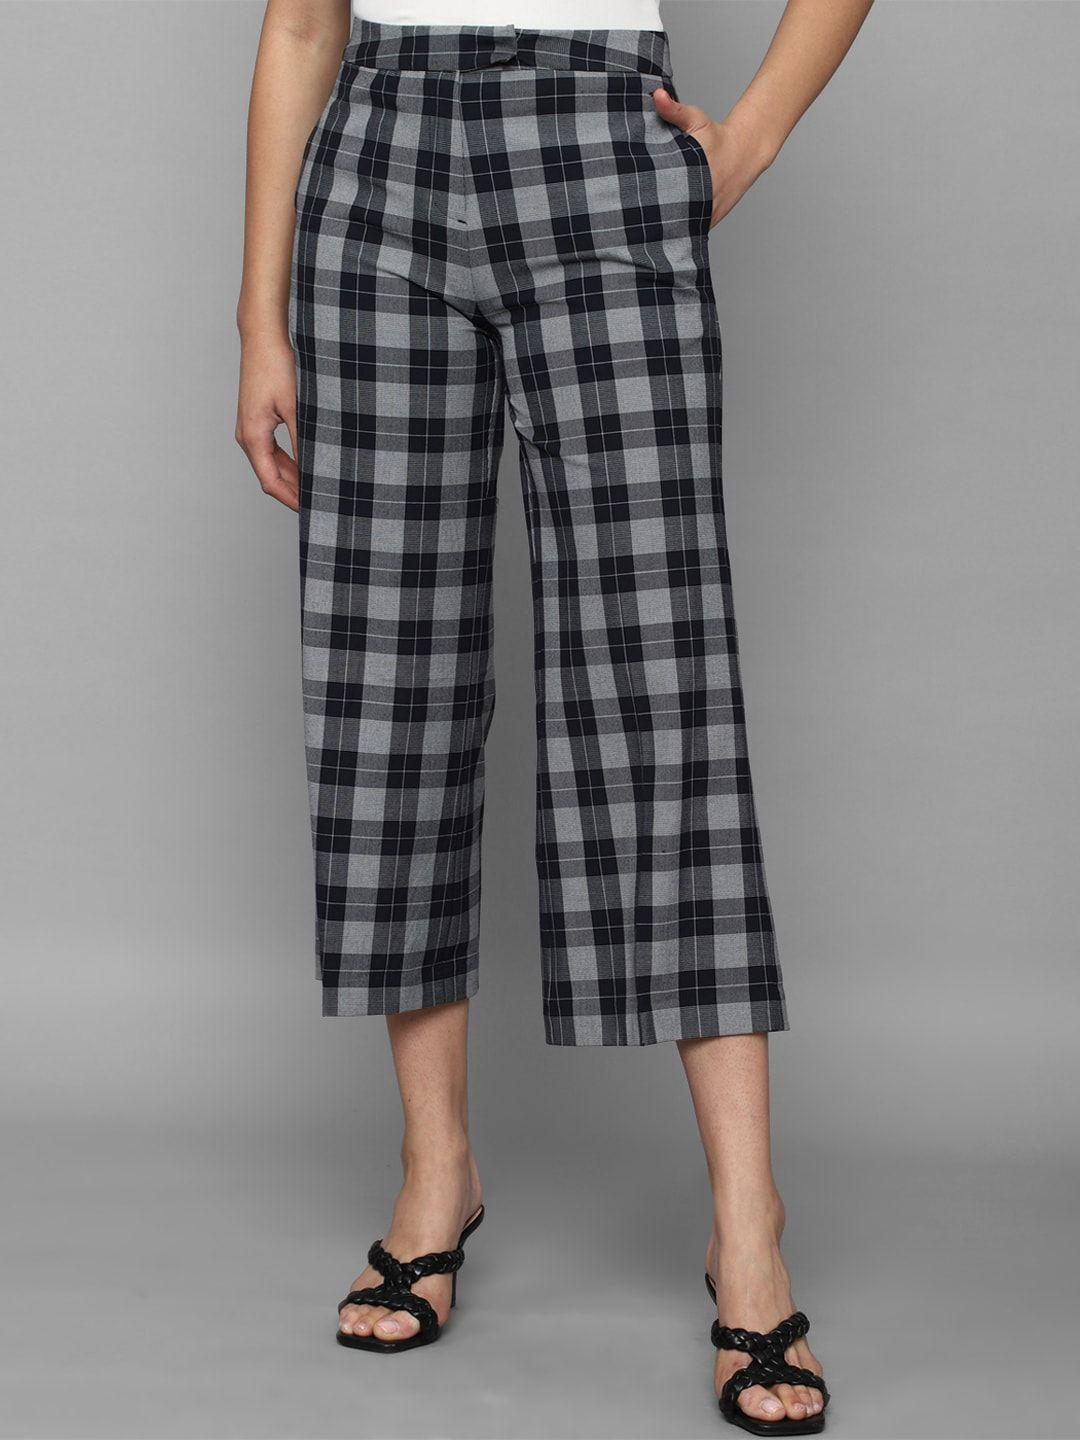 allen-solly-woman-checked-culottes-trousers